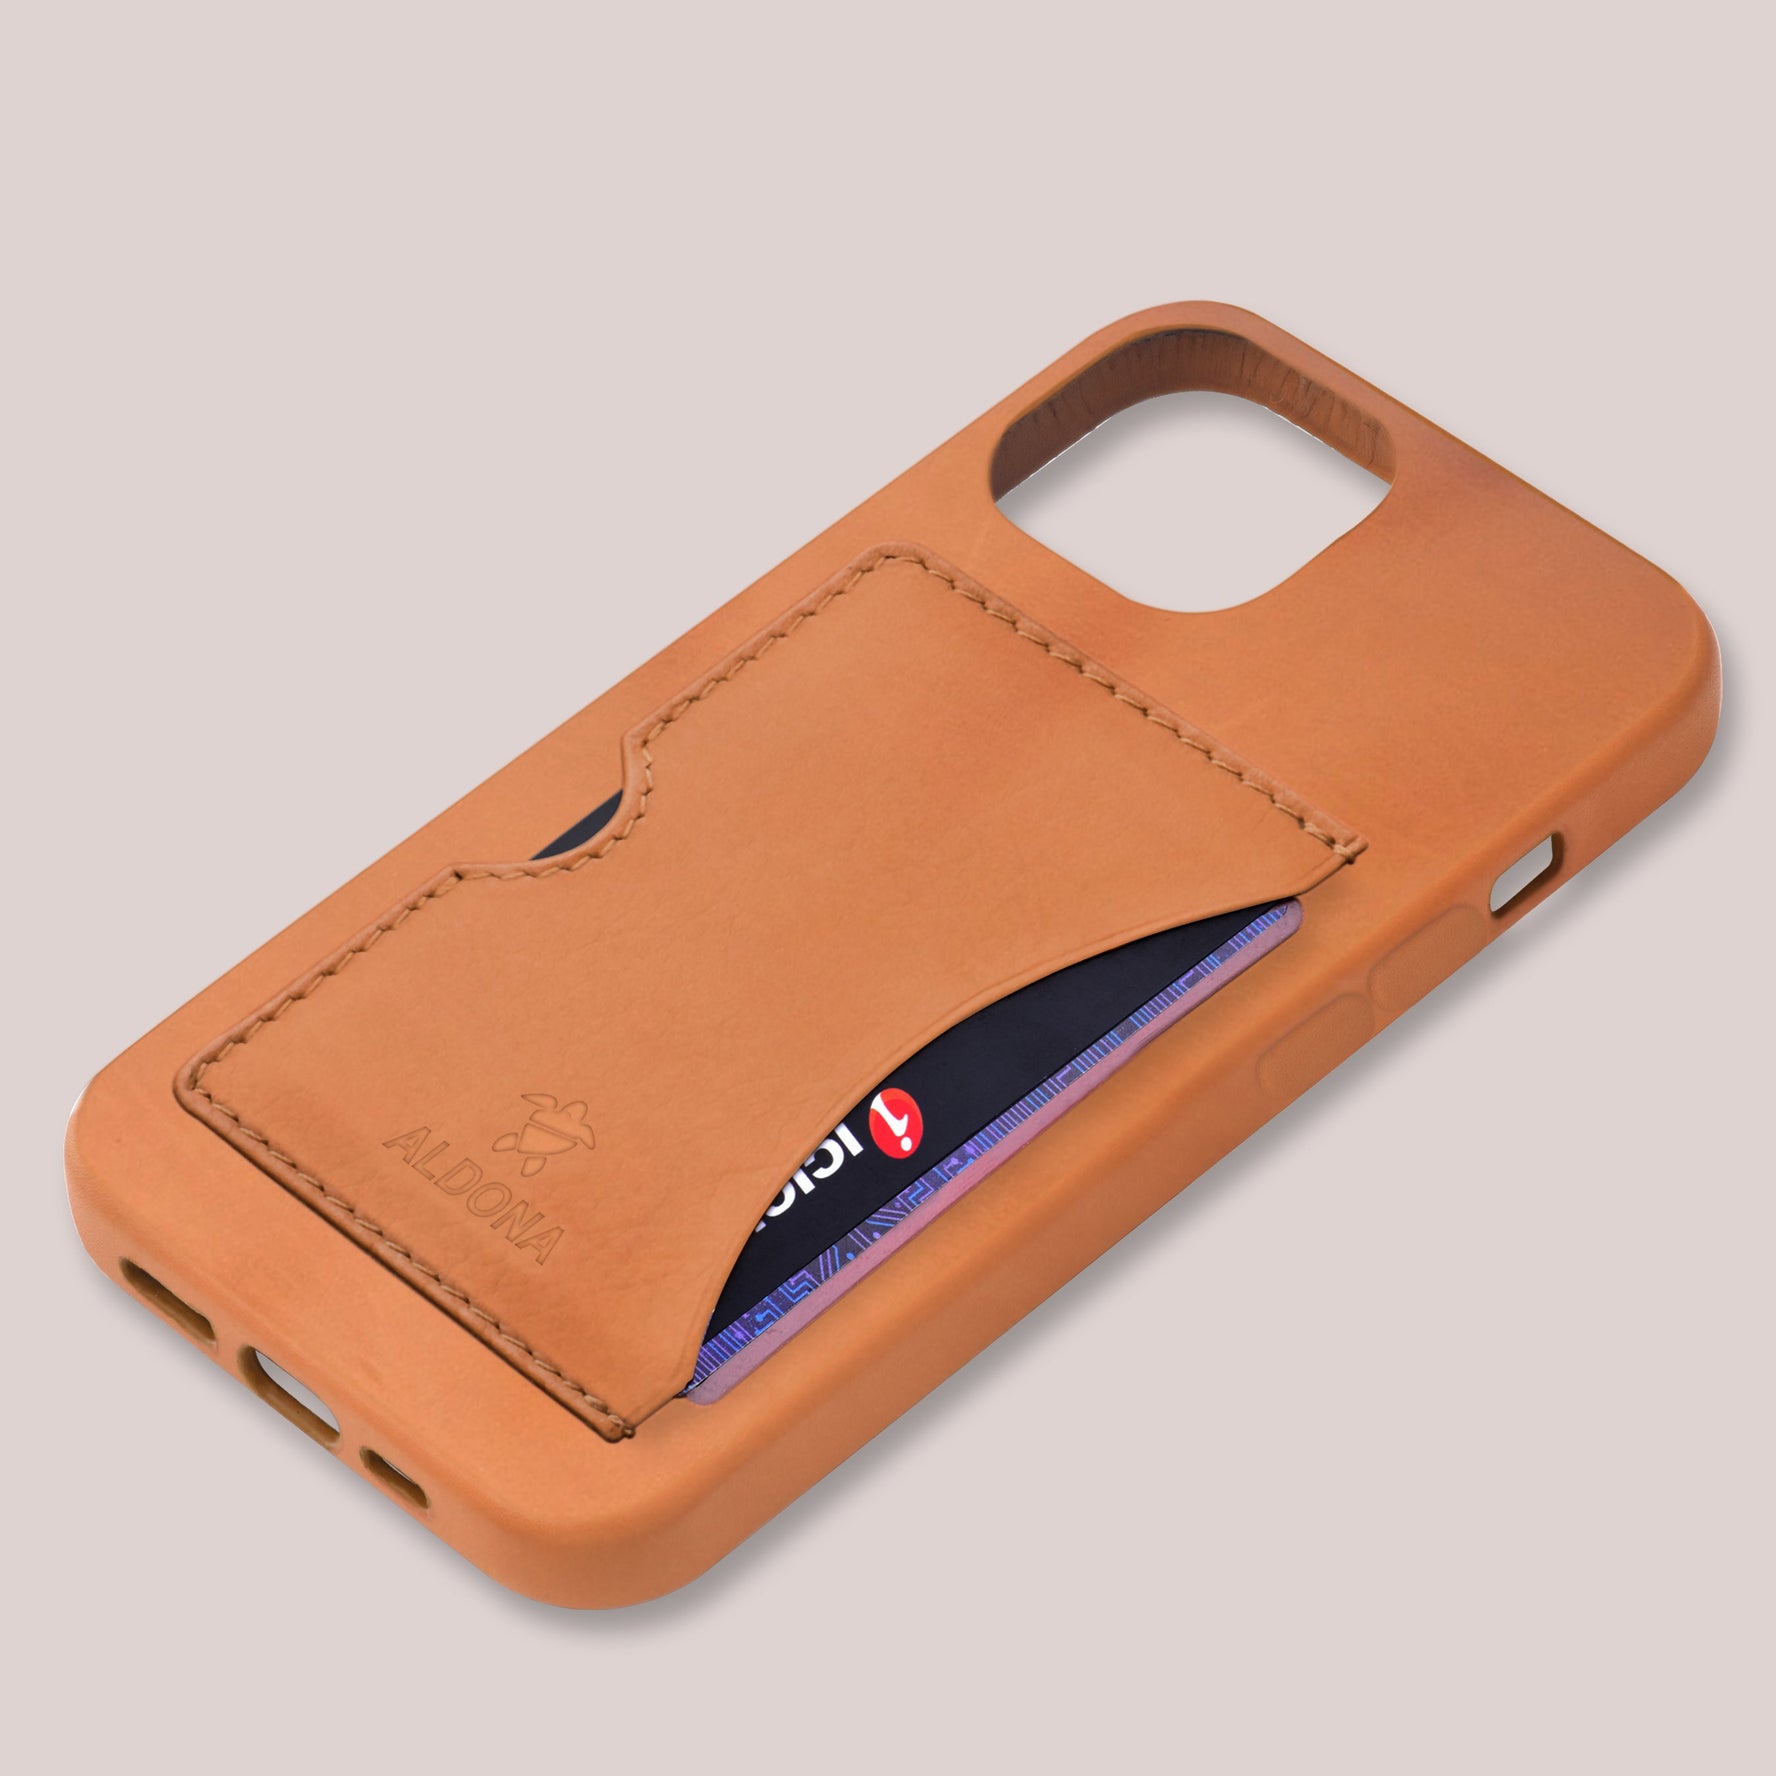 Baxter Card Case for iPhone 13 series - Vintage Tan